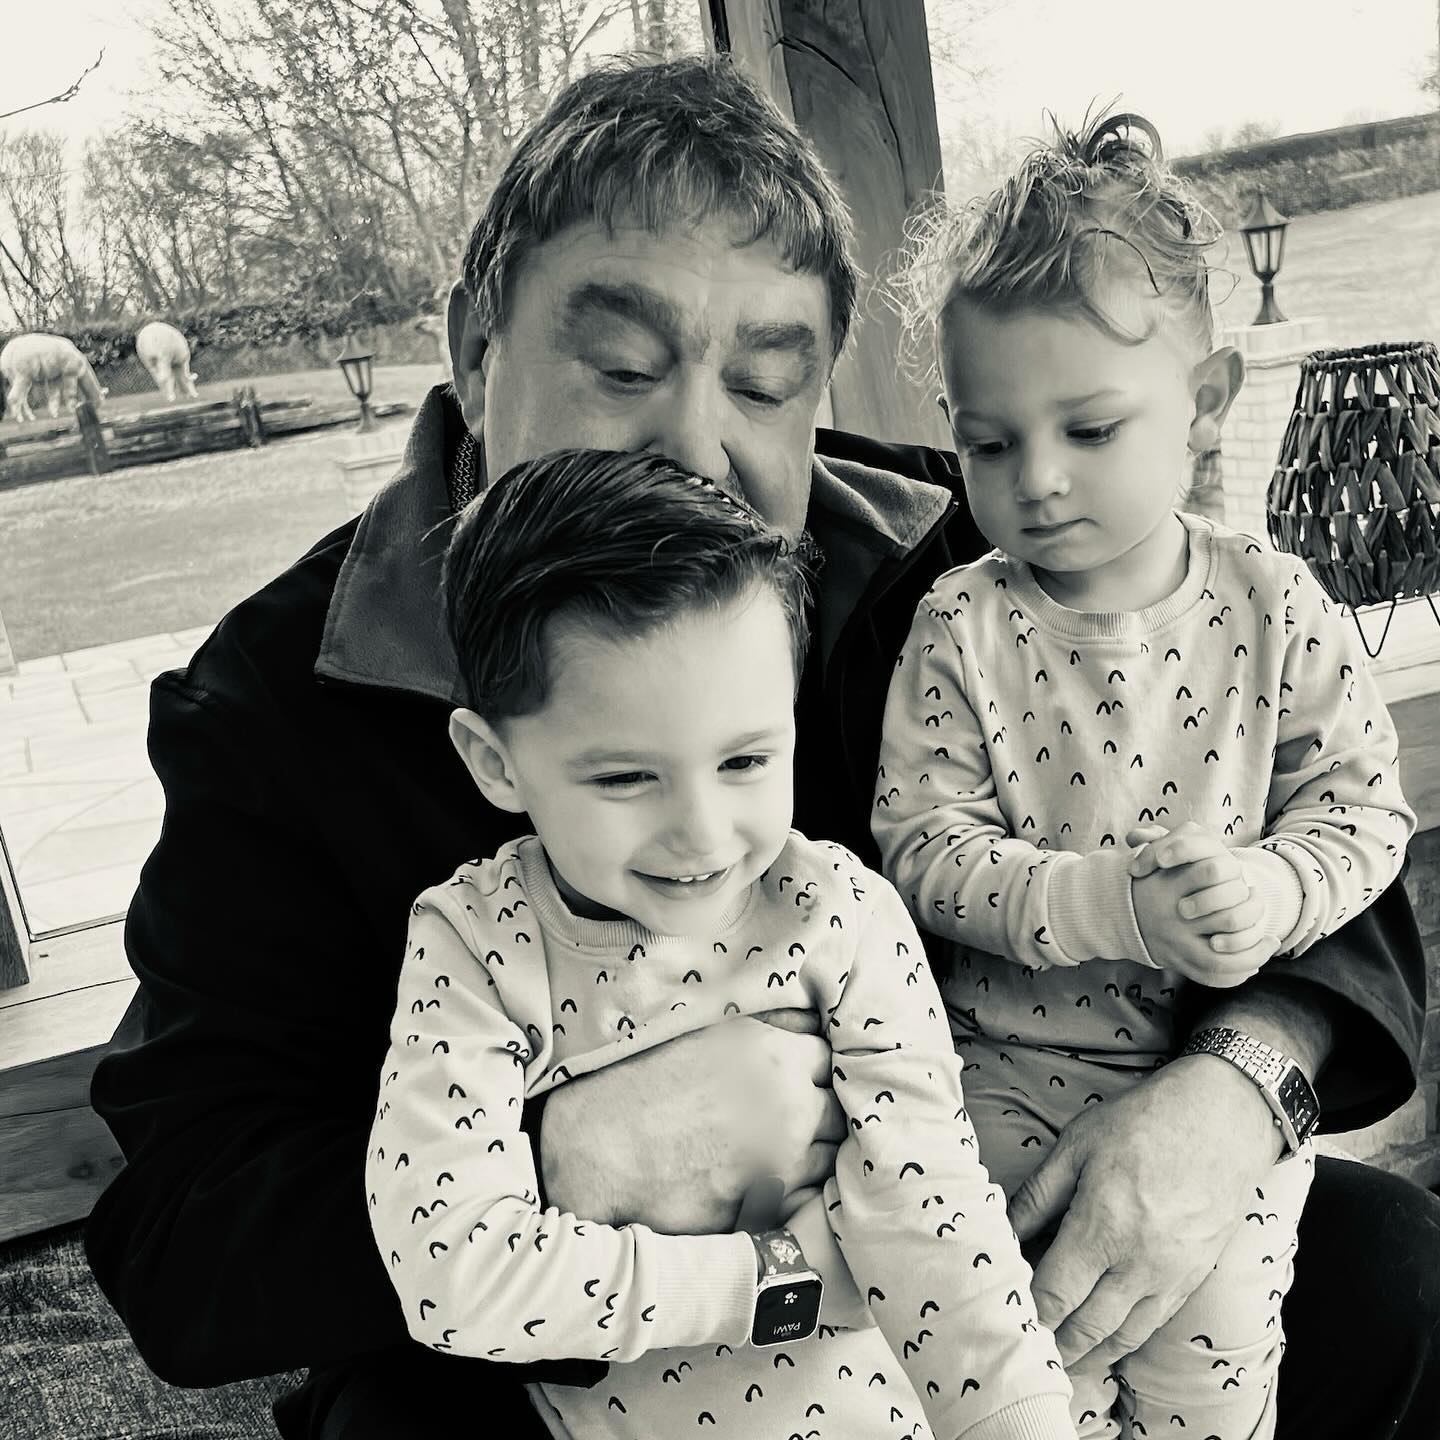 She shared a heap of sweet snaps of Alan and her family